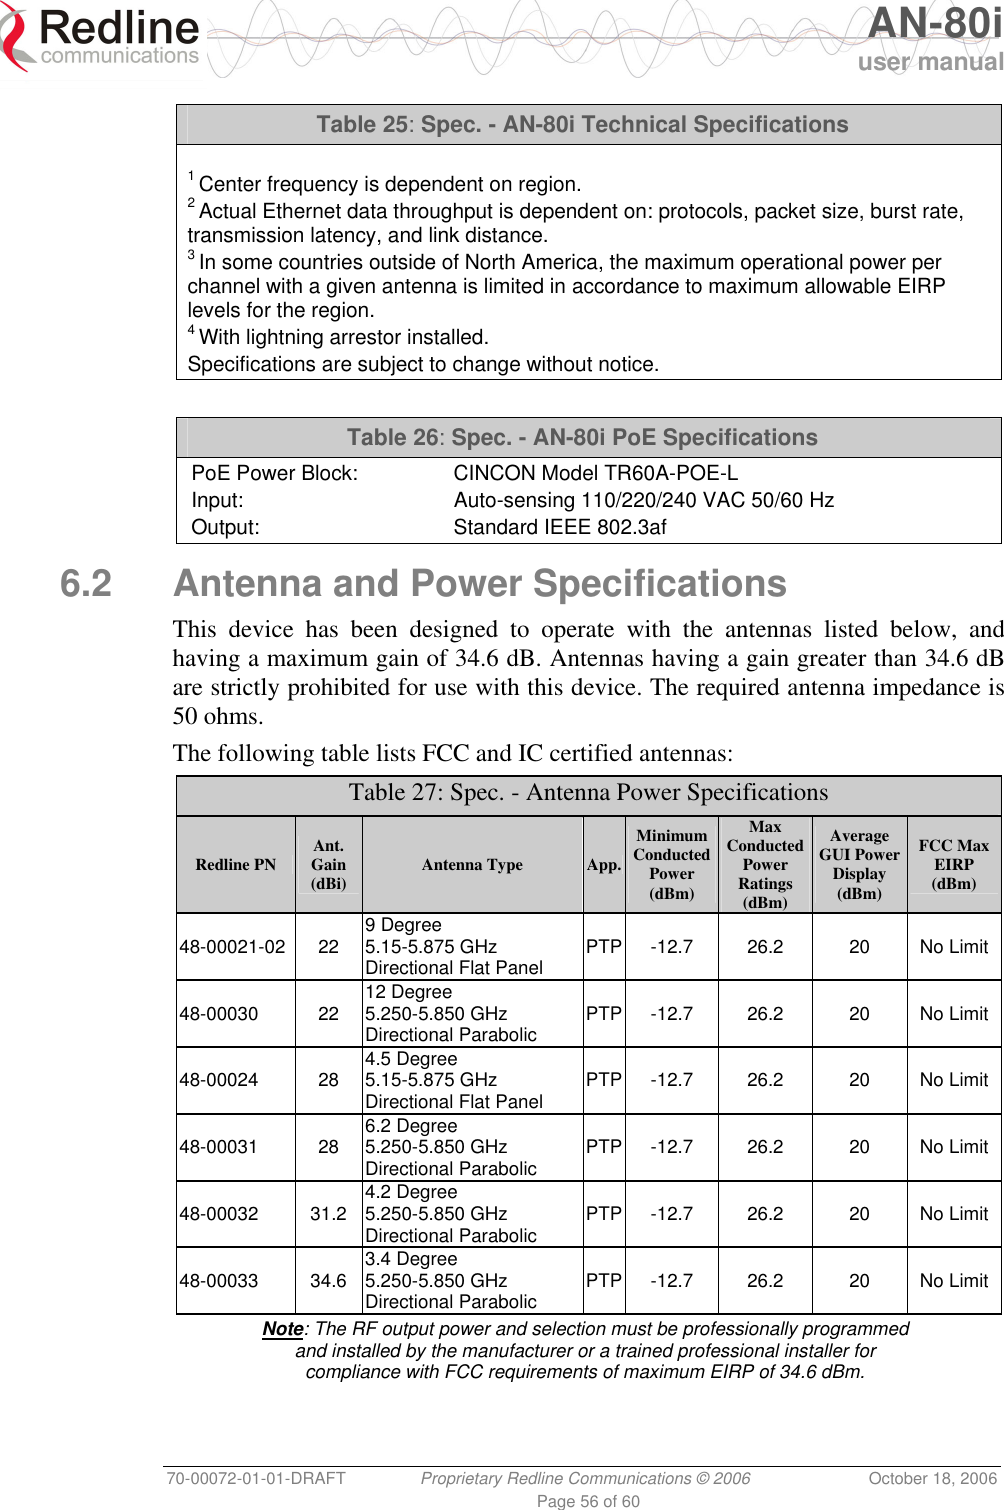   AN-80i user manual 70-00072-01-01-DRAFT  Proprietary Redline Communications © 2006  October 18, 2006 Page 56 of 60 Table 25: Spec. - AN-80i Technical Specifications   1 Center frequency is dependent on region. 2 Actual Ethernet data throughput is dependent on: protocols, packet size, burst rate, transmission latency, and link distance. 3 In some countries outside of North America, the maximum operational power per channel with a given antenna is limited in accordance to maximum allowable EIRP levels for the region. 4 With lightning arrestor installed. Specifications are subject to change without notice.  Table 26: Spec. - AN-80i PoE Specifications PoE Power Block:  CINCON Model TR60A-POE-L Input:  Auto-sensing 110/220/240 VAC 50/60 Hz Output:  Standard IEEE 802.3af  6.2  Antenna and Power Specifications  This device has been designed to operate with the antennas listed below, and having a maximum gain of 34.6 dB. Antennas having a gain greater than 34.6 dB are strictly prohibited for use with this device. The required antenna impedance is 50 ohms. The following table lists FCC and IC certified antennas: Table 27: Spec. - Antenna Power Specifications Redline PN  Ant. Gain (dBi)  Antenna Type  App.Minimum Conducted Power (dBm) Max Conducted Power Ratings (dBm) Average GUI Power Display (dBm) FCC Max EIRP (dBm) 48-00021-02 22 9 Degree 5.15-5.875 GHz Directional Flat Panel  PTP -12.7 26.2  20 No Limit 48-00030 22 12 Degree 5.250-5.850 GHz Directional Parabolic  PTP -12.7 26.2  20 No Limit 48-00024 28 4.5 Degree 5.15-5.875 GHz Directional Flat Panel  PTP -12.7 26.2  20 No Limit 48-00031 28 6.2 Degree 5.250-5.850 GHz Directional Parabolic  PTP -12.7 26.2  20 No Limit 48-00032 31.2 4.2 Degree 5.250-5.850 GHz Directional Parabolic  PTP -12.7 26.2  20 No Limit 48-00033 34.6 3.4 Degree 5.250-5.850 GHz Directional Parabolic  PTP -12.7 26.2  20 No Limit Note: The RF output power and selection must be professionally programmed and installed by the manufacturer or a trained professional installer for compliance with FCC requirements of maximum EIRP of 34.6 dBm. 